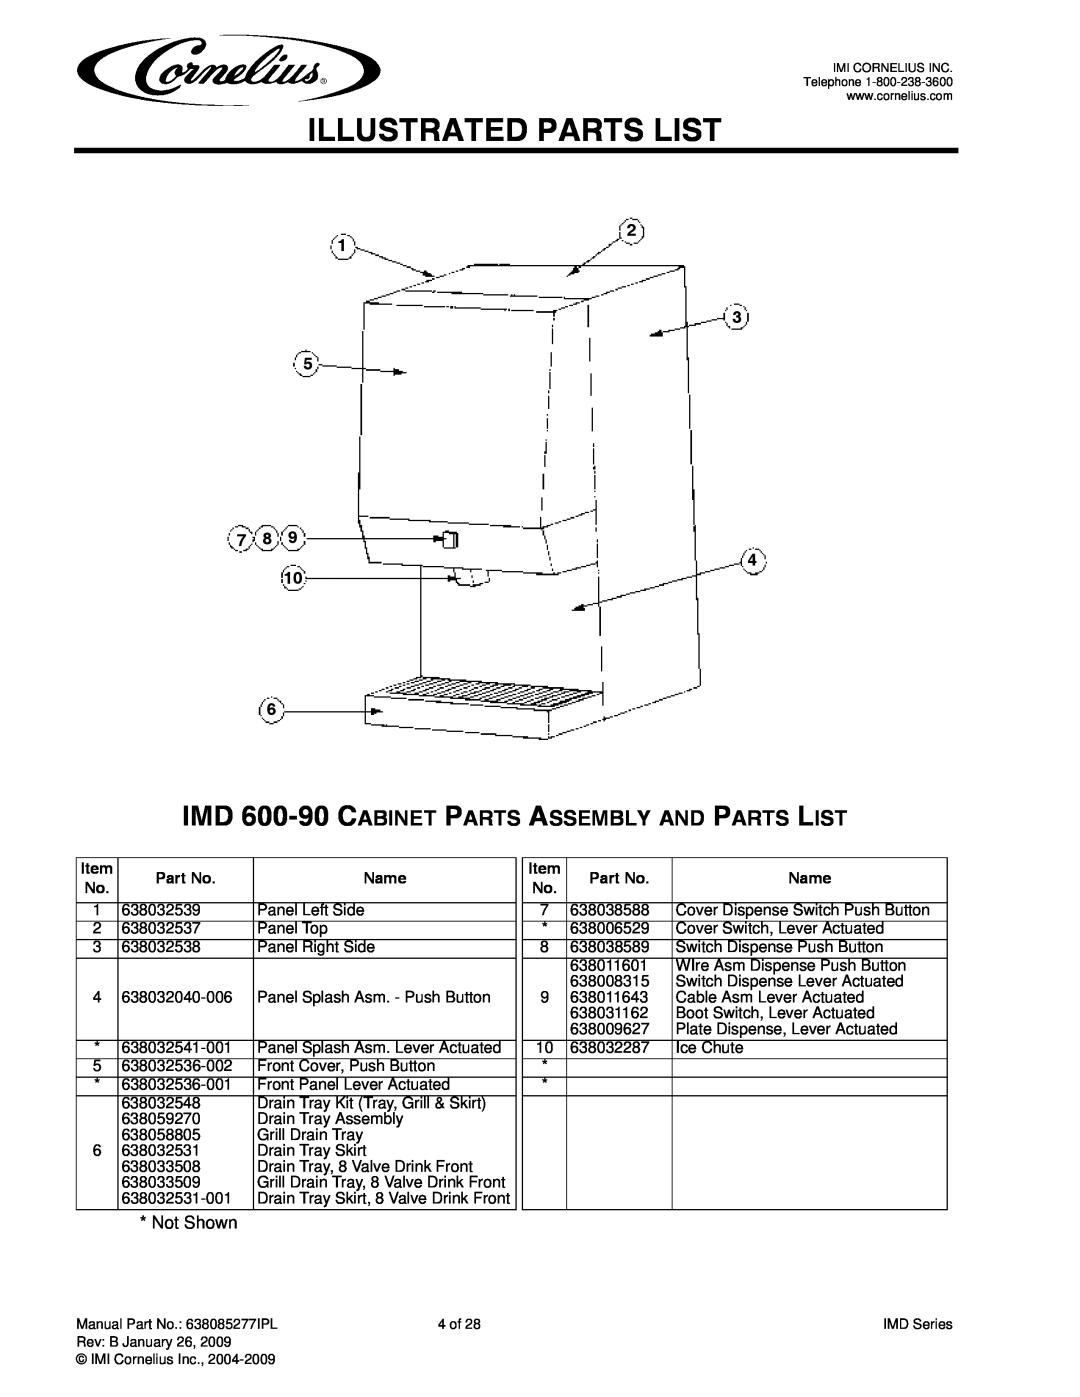 Cornelius IMD600-30, IMD300-30 manual IMD 600-90CABINET PARTS ASSEMBLY AND PARTS LIST, Illustrated Parts List, Not Shown 